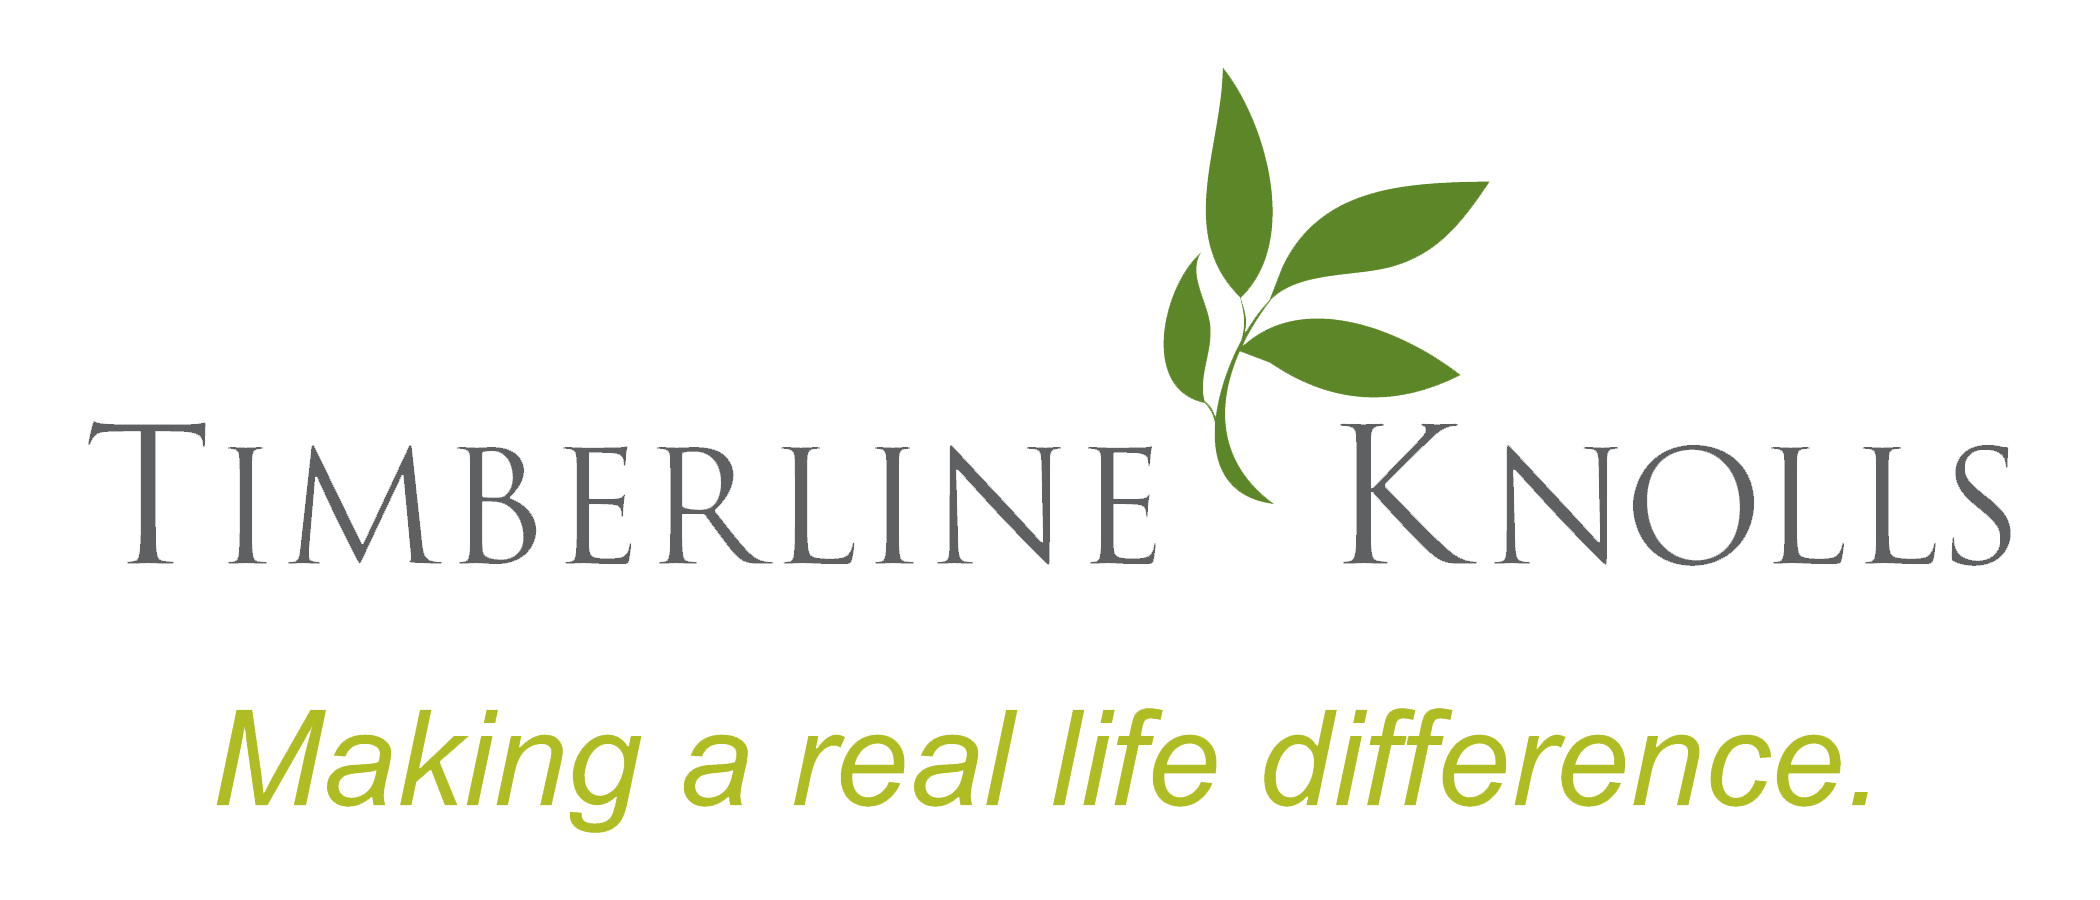 Timberline Knolls - Making a Real Life Difference